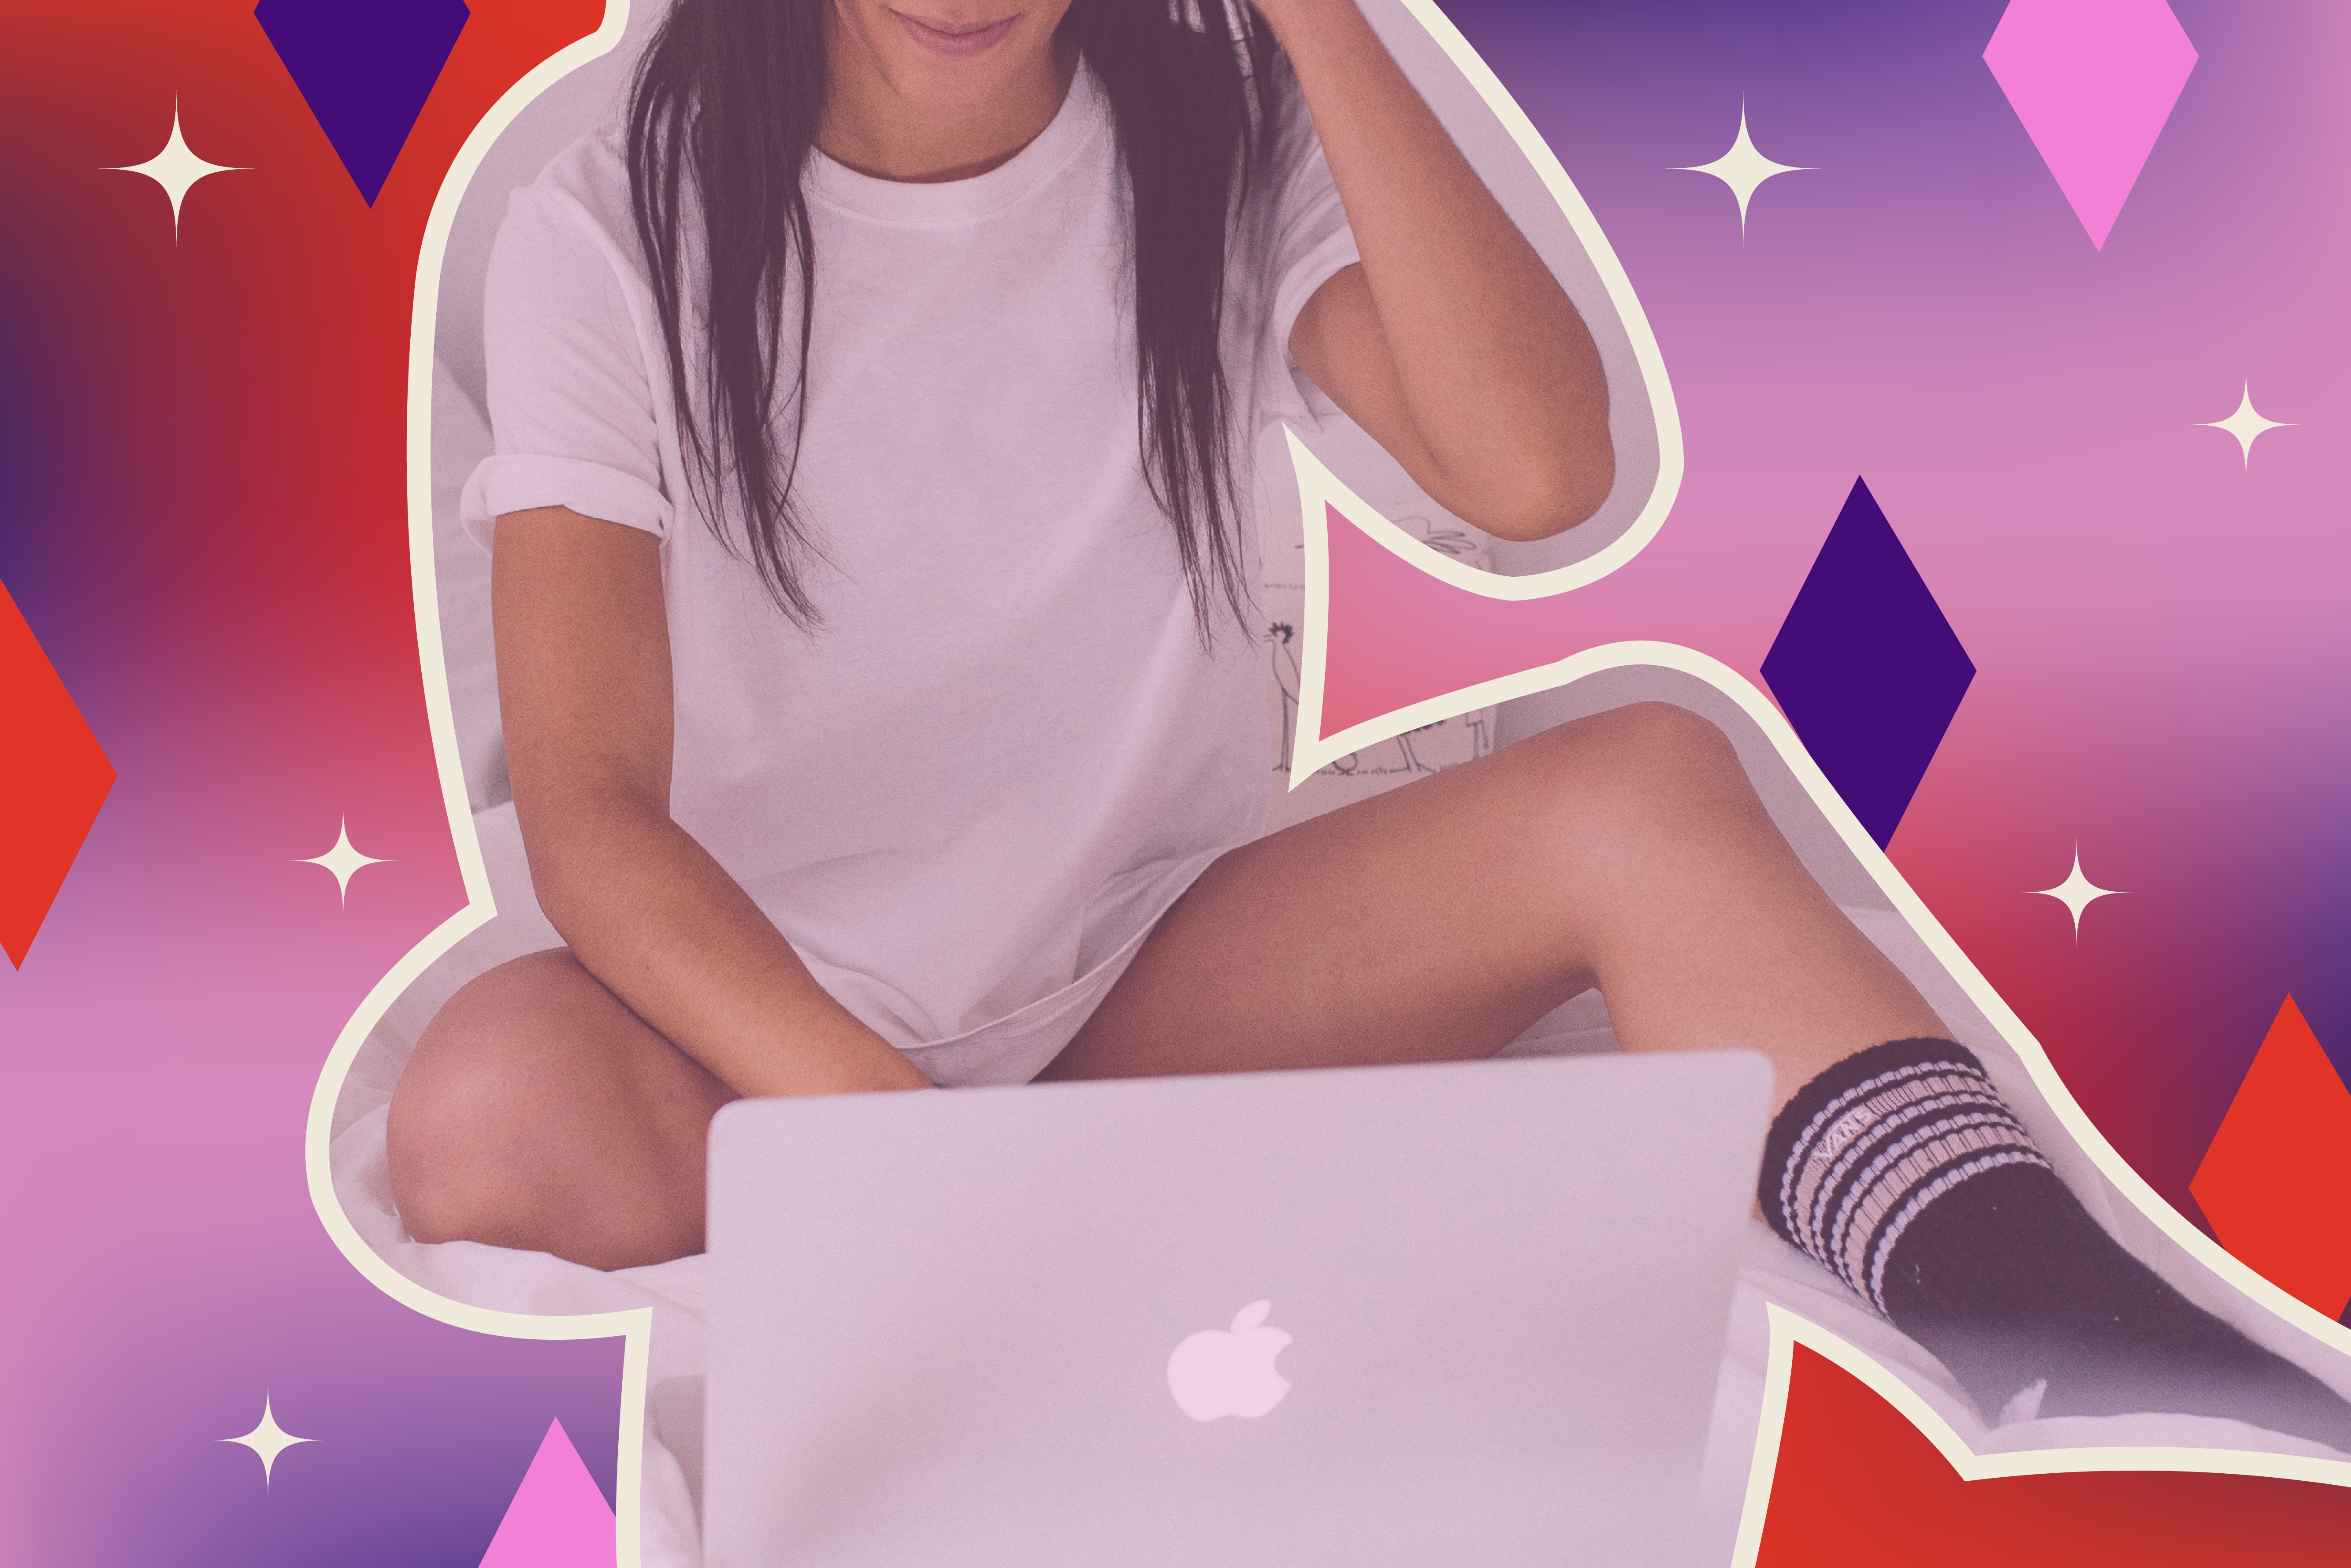 A College OnlyFans Creator Shares Her Journey With Confidence On The Platform